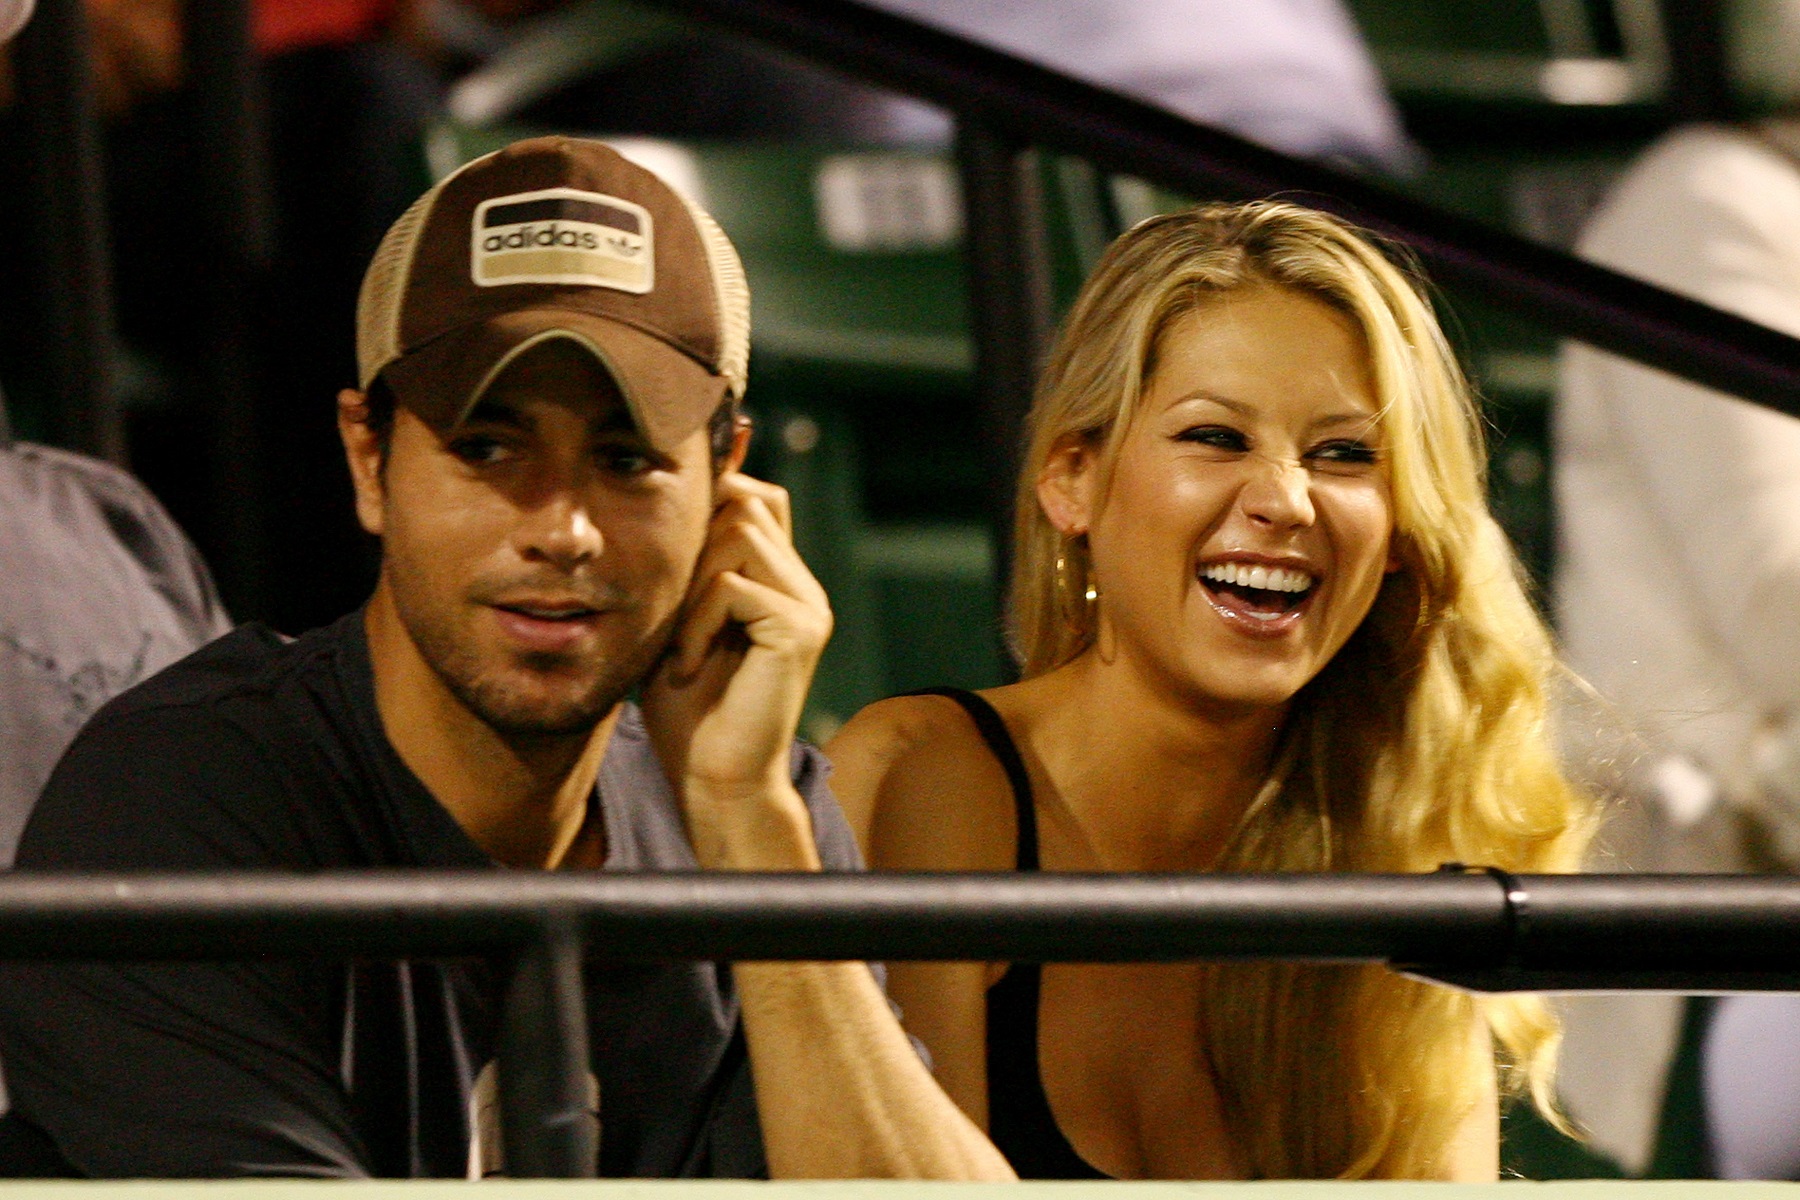 KEY BISCAYNE, FL - APRIL 02:  Enrique Iglesias and girlfriend Anna Kournikova watch as Venus Williams plays her semifinal match against Serena Williams at the Sony Ericsson Open at the Crandon Park Tennis Center on April 2, 2009 in Key Biscayne, Florida.  (Photo by Al Bello/Getty Images)